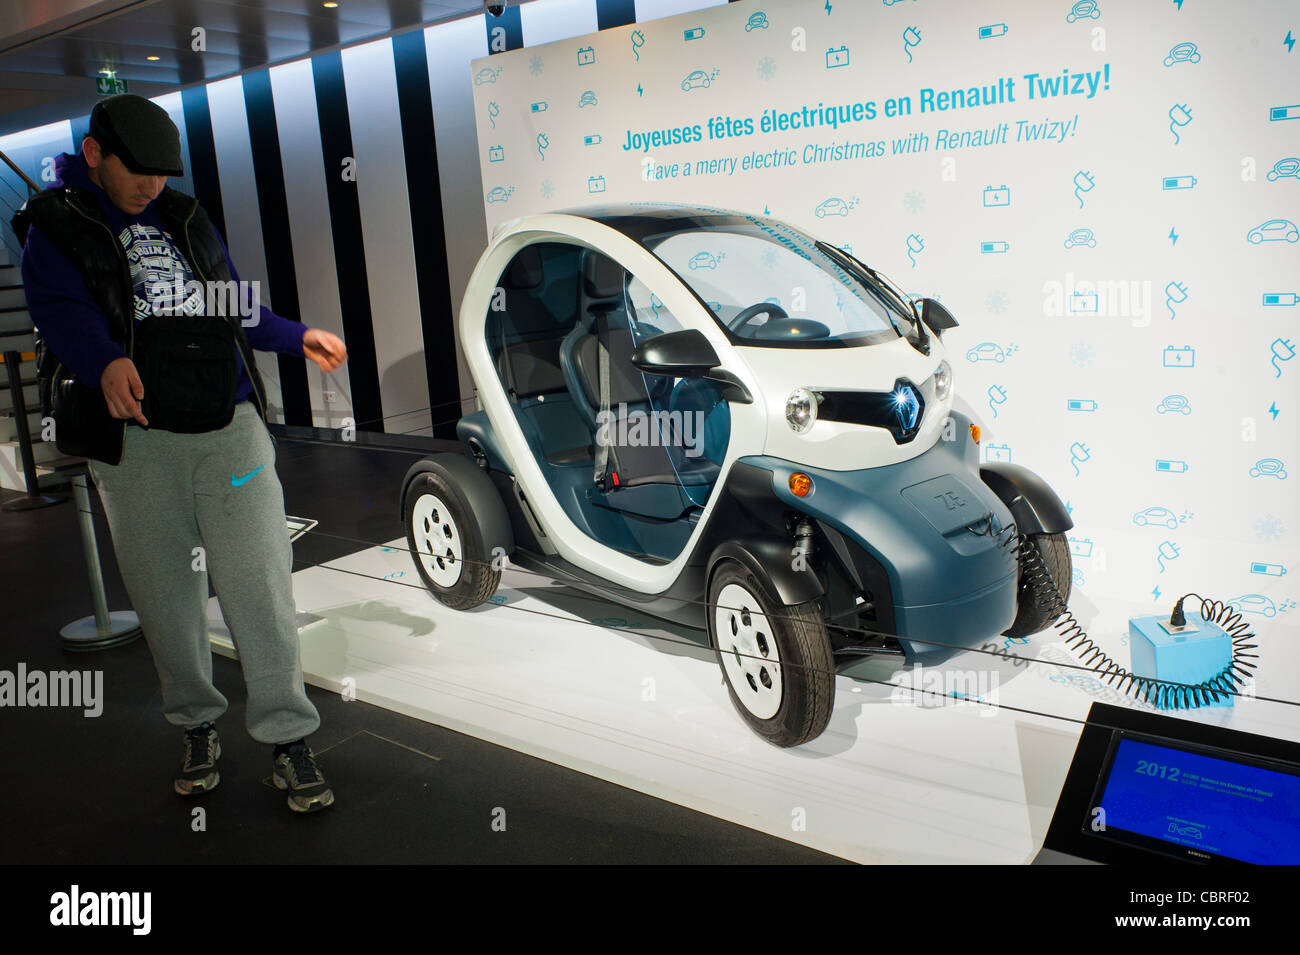 Paris, France, People visitjng inside New Car Showroom, Looking at Renault Mini Electric Car the "Twizy" on Display Cars, global green economy concept, side view, france innovation Stock Photo